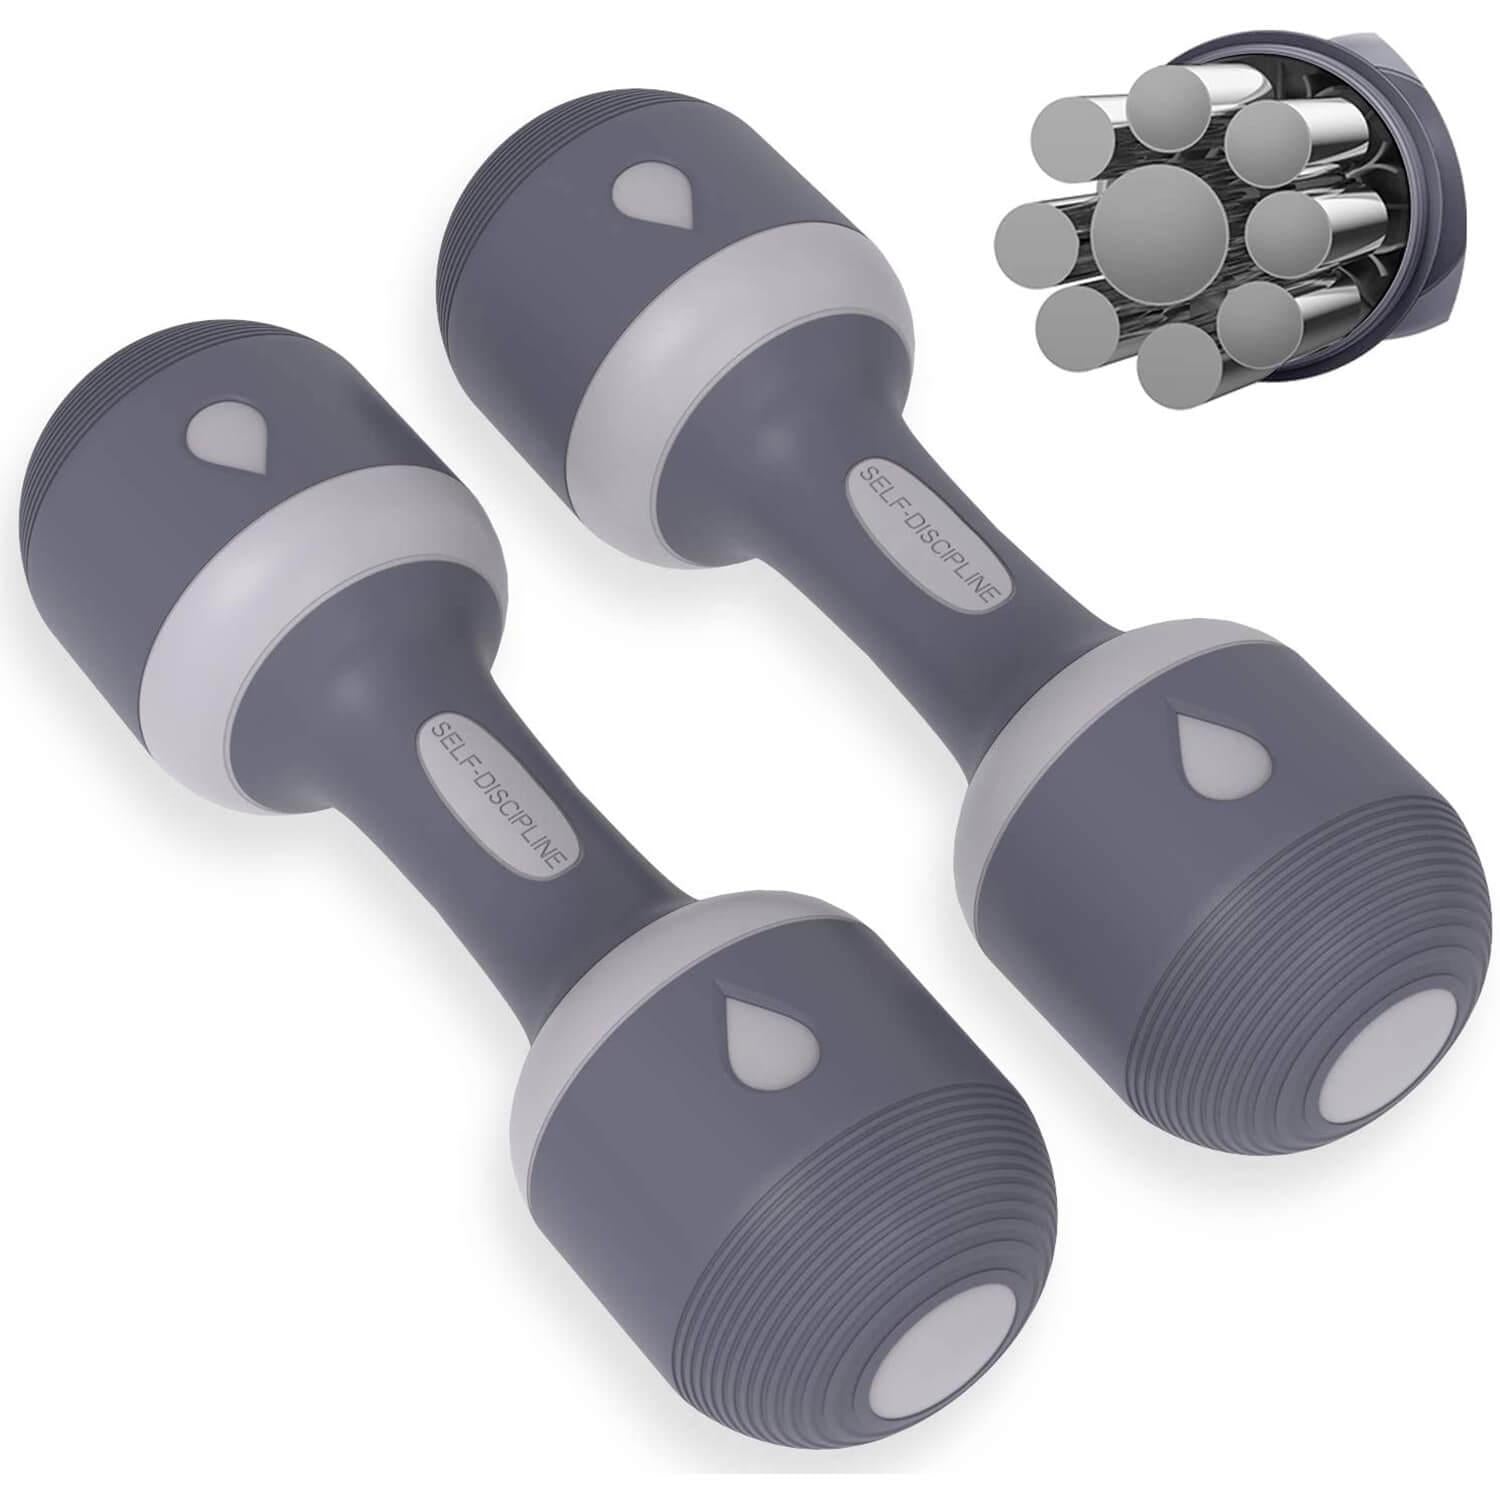 Weights Dumbbell Set - 5-IN-1 Adjustable Weights Dumbbell Set